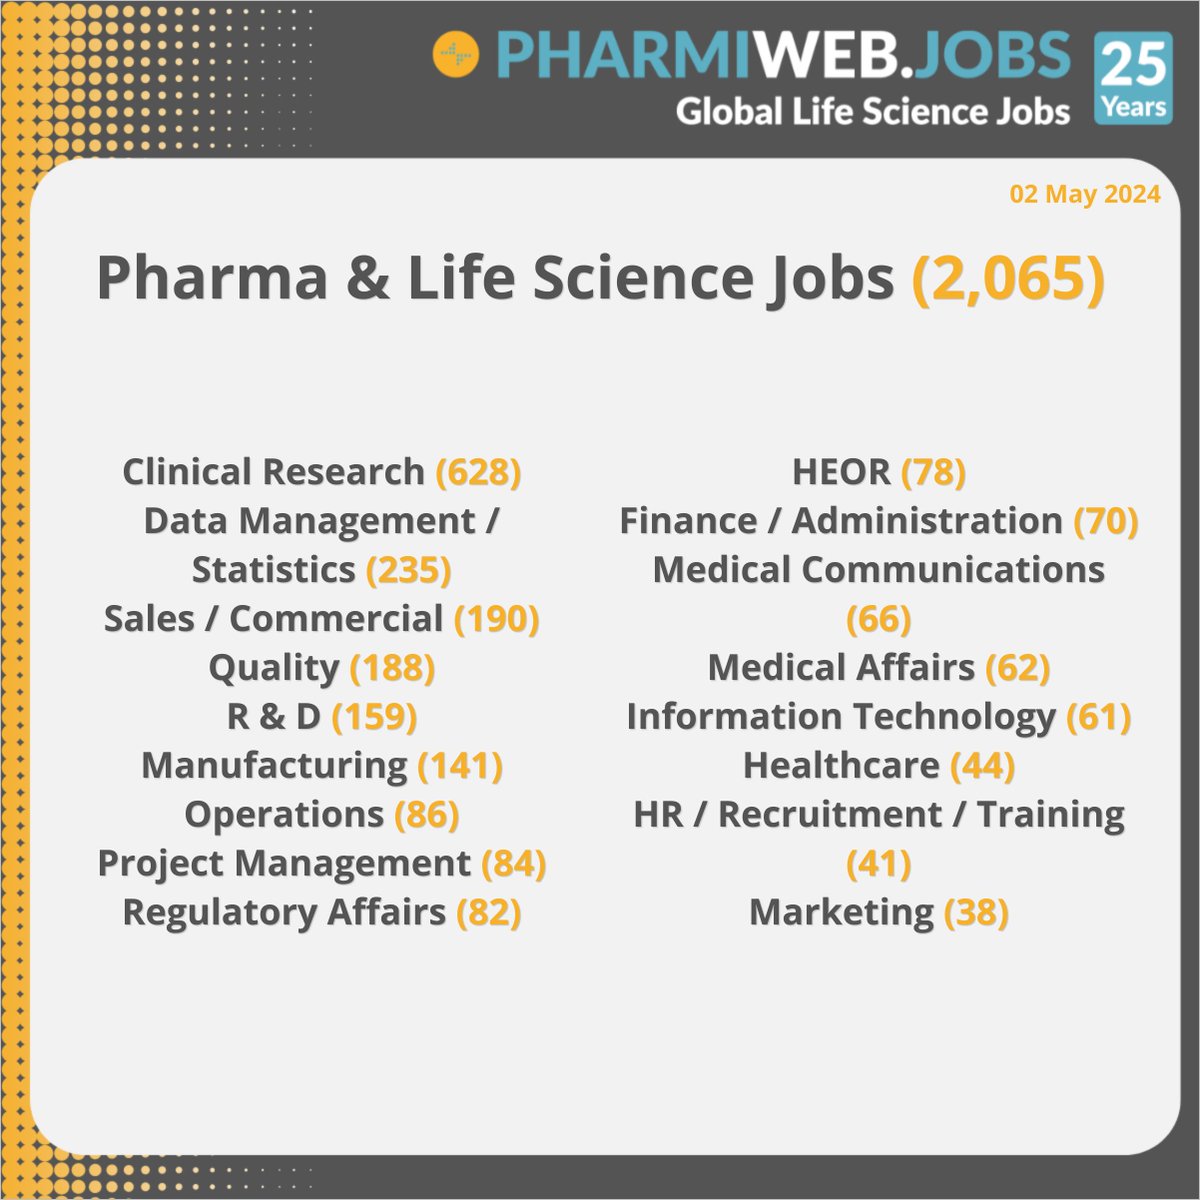 2,065 Pharma & Life Science Jobs Today
Search Now - buff.ly/4a6WF9k

Register & Upload Your CV Now! buff.ly/4dpKhnG

#Pharma #Biotech #ClinicalResearch #LifeSciences #MedicalDevices #Biotechnology #PharmaJobs #PharmiWeb